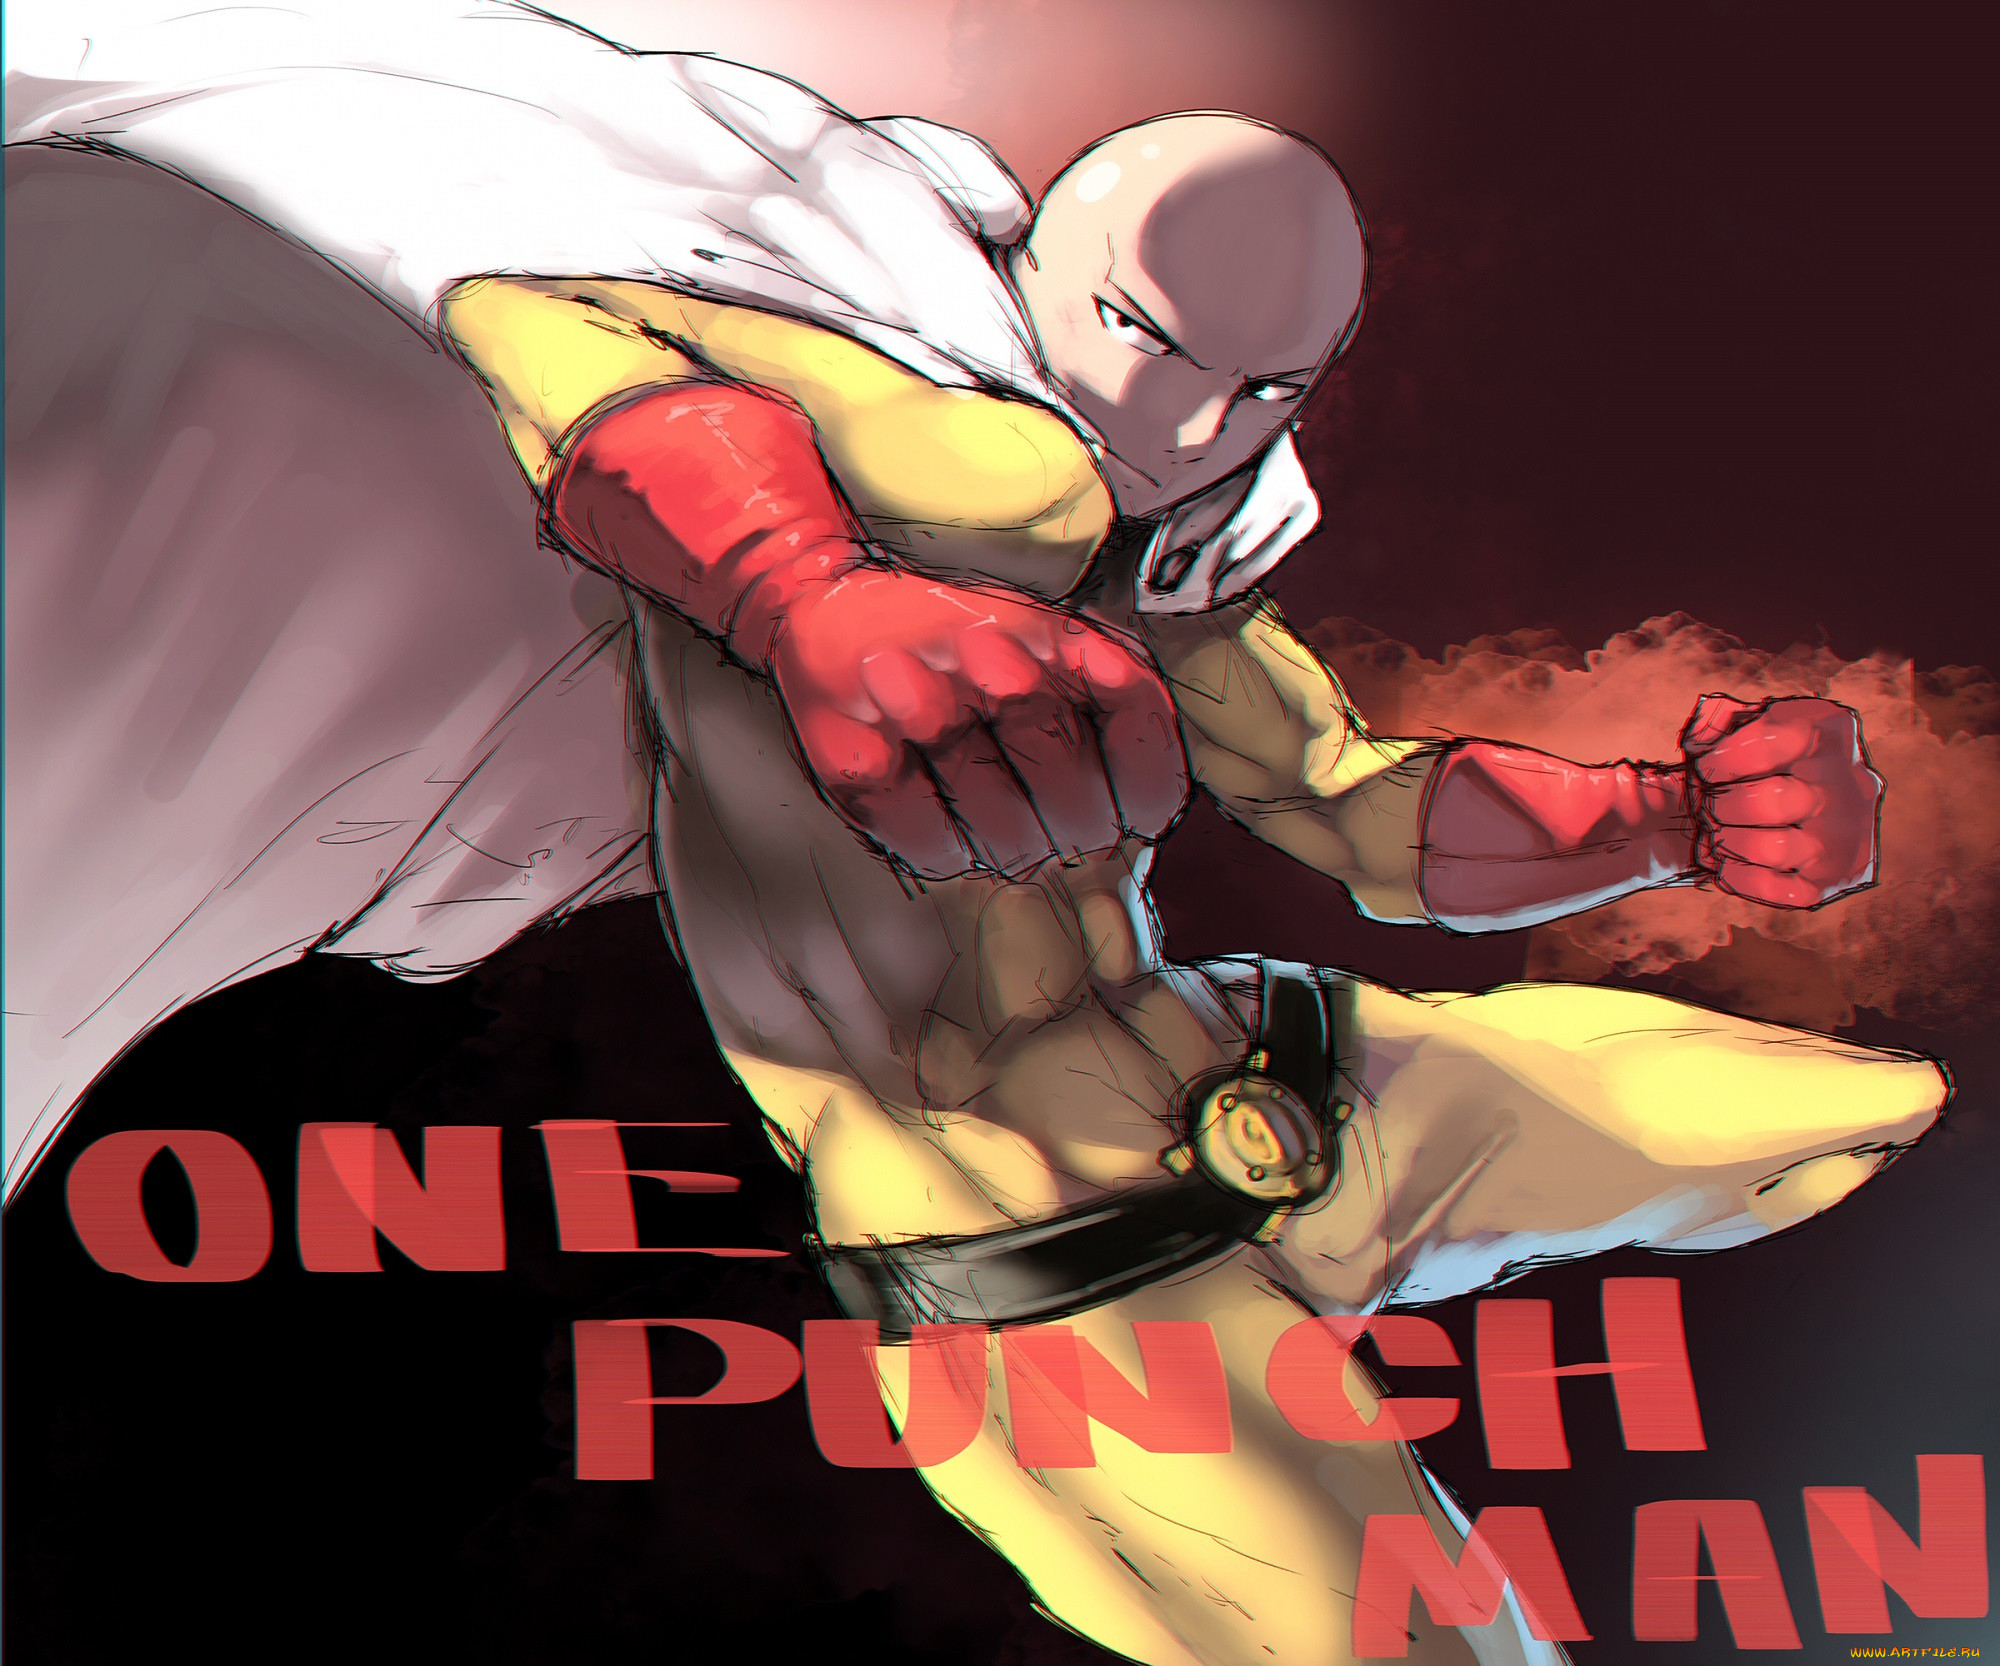 , one punch man, 